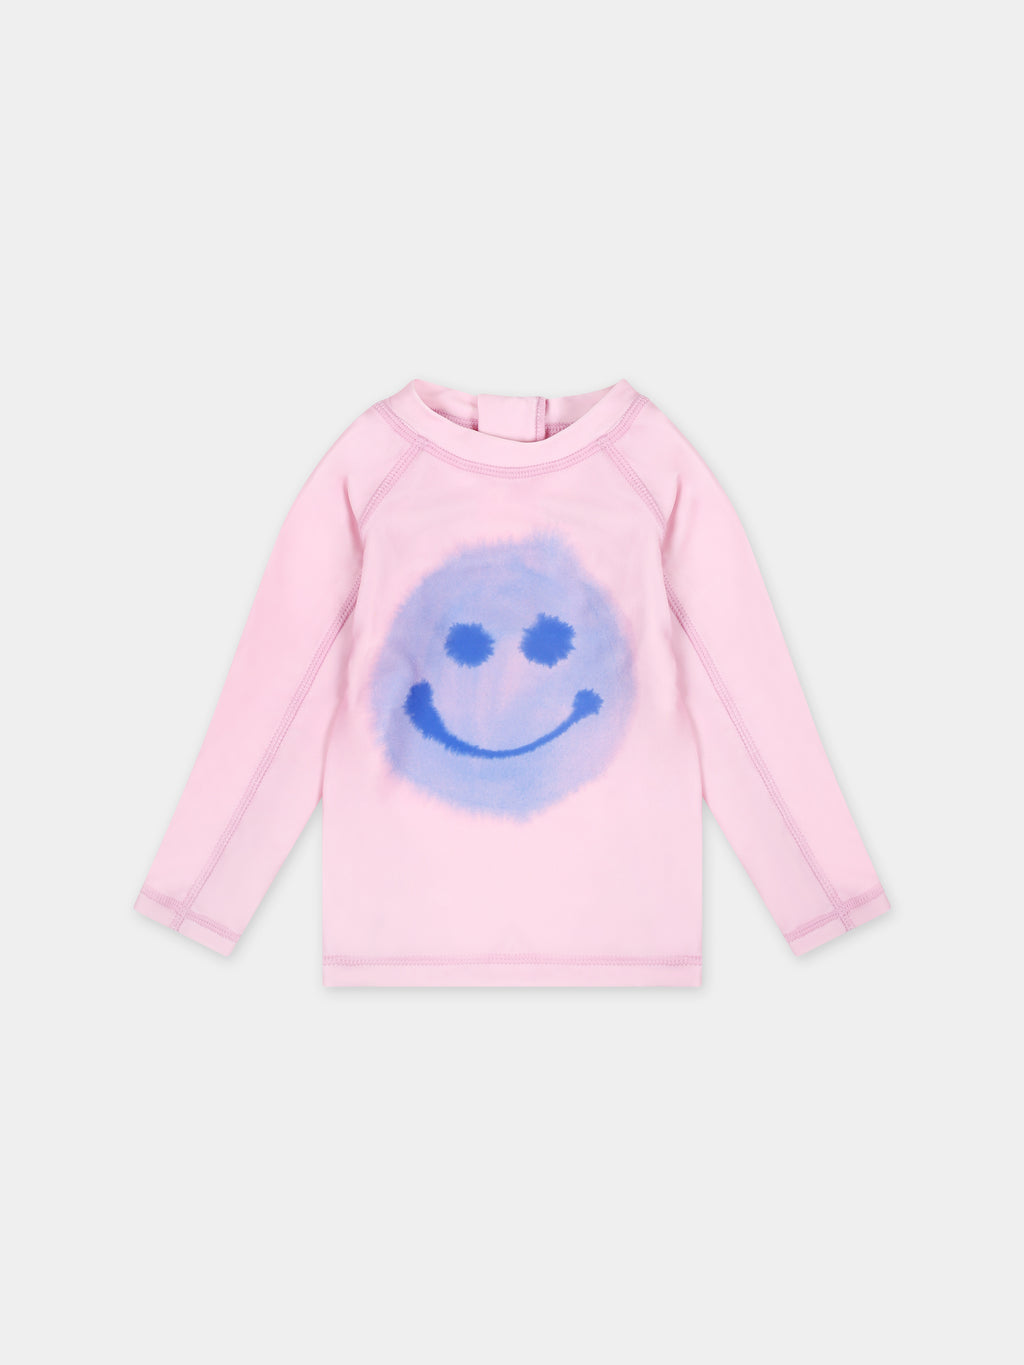 Pink t-shirt for baby girl with smiley